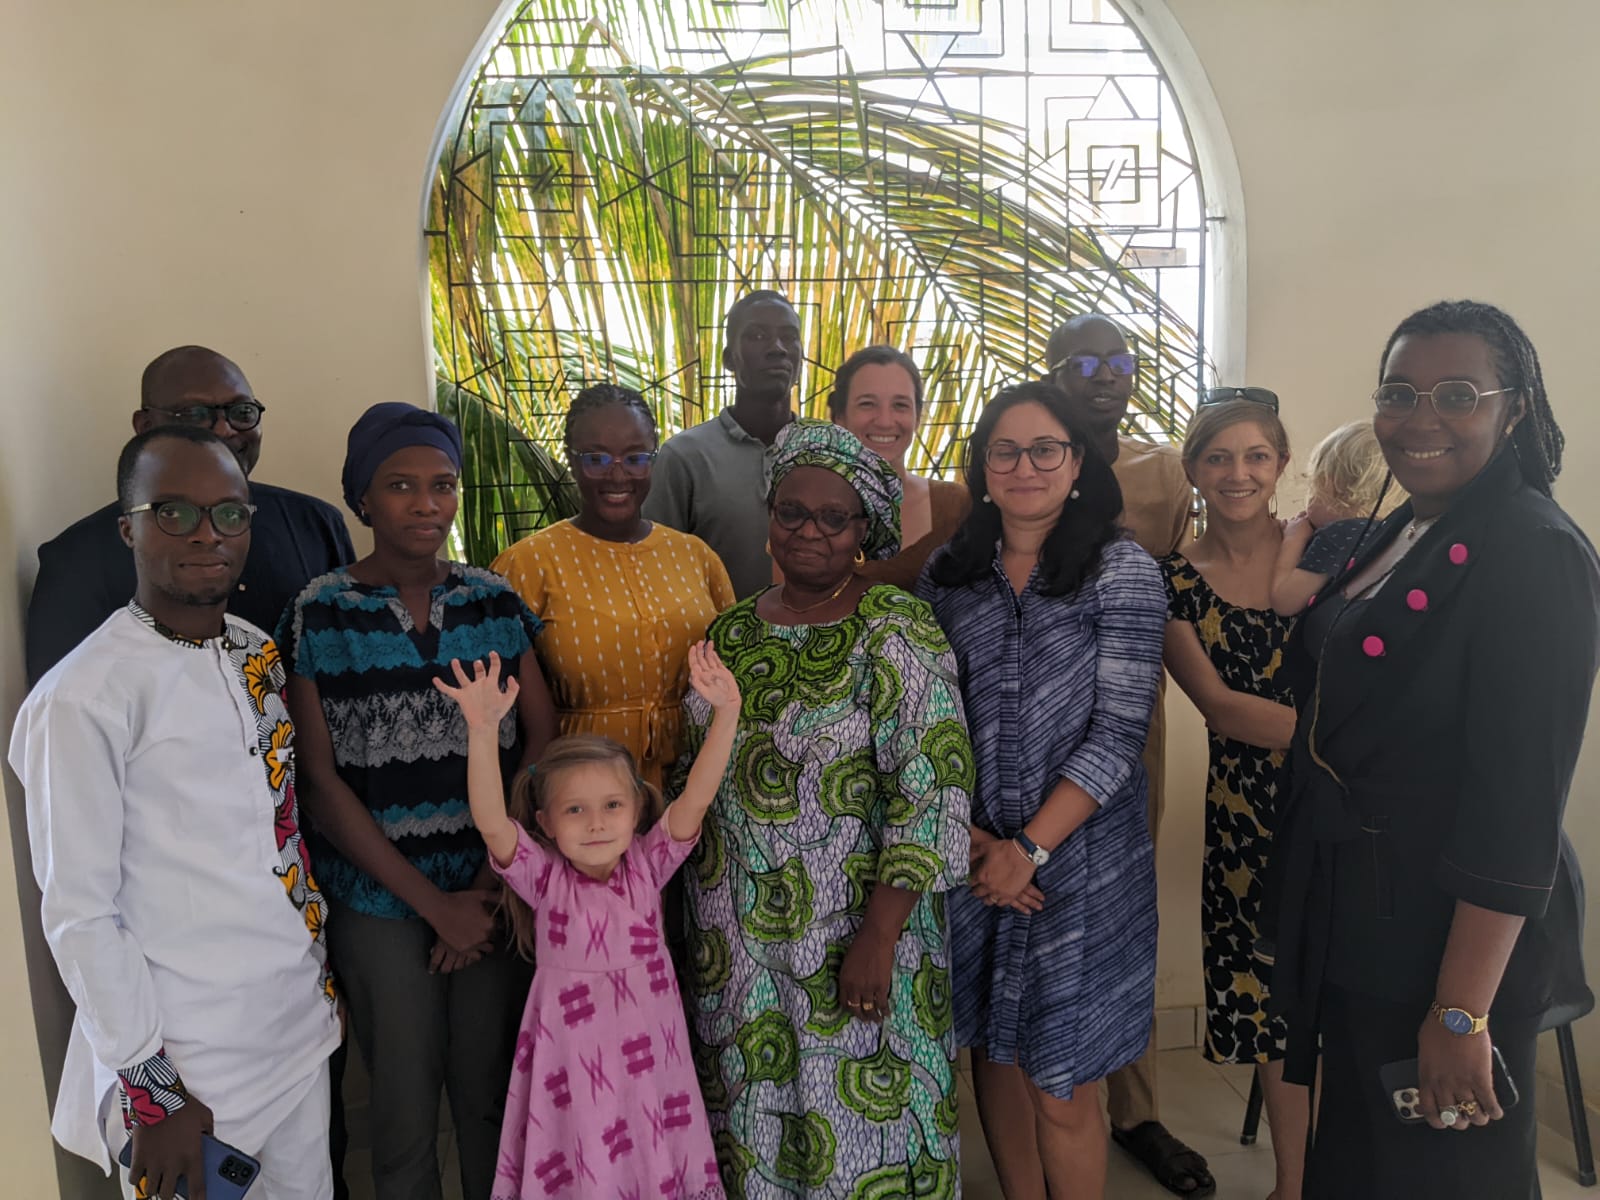 Participating members of the West Africa convening in Dakar stand in a group and face the camera smiling. They are standing in front of a window with a decorative screen of geometric shapes, and a palm tree outside the window.